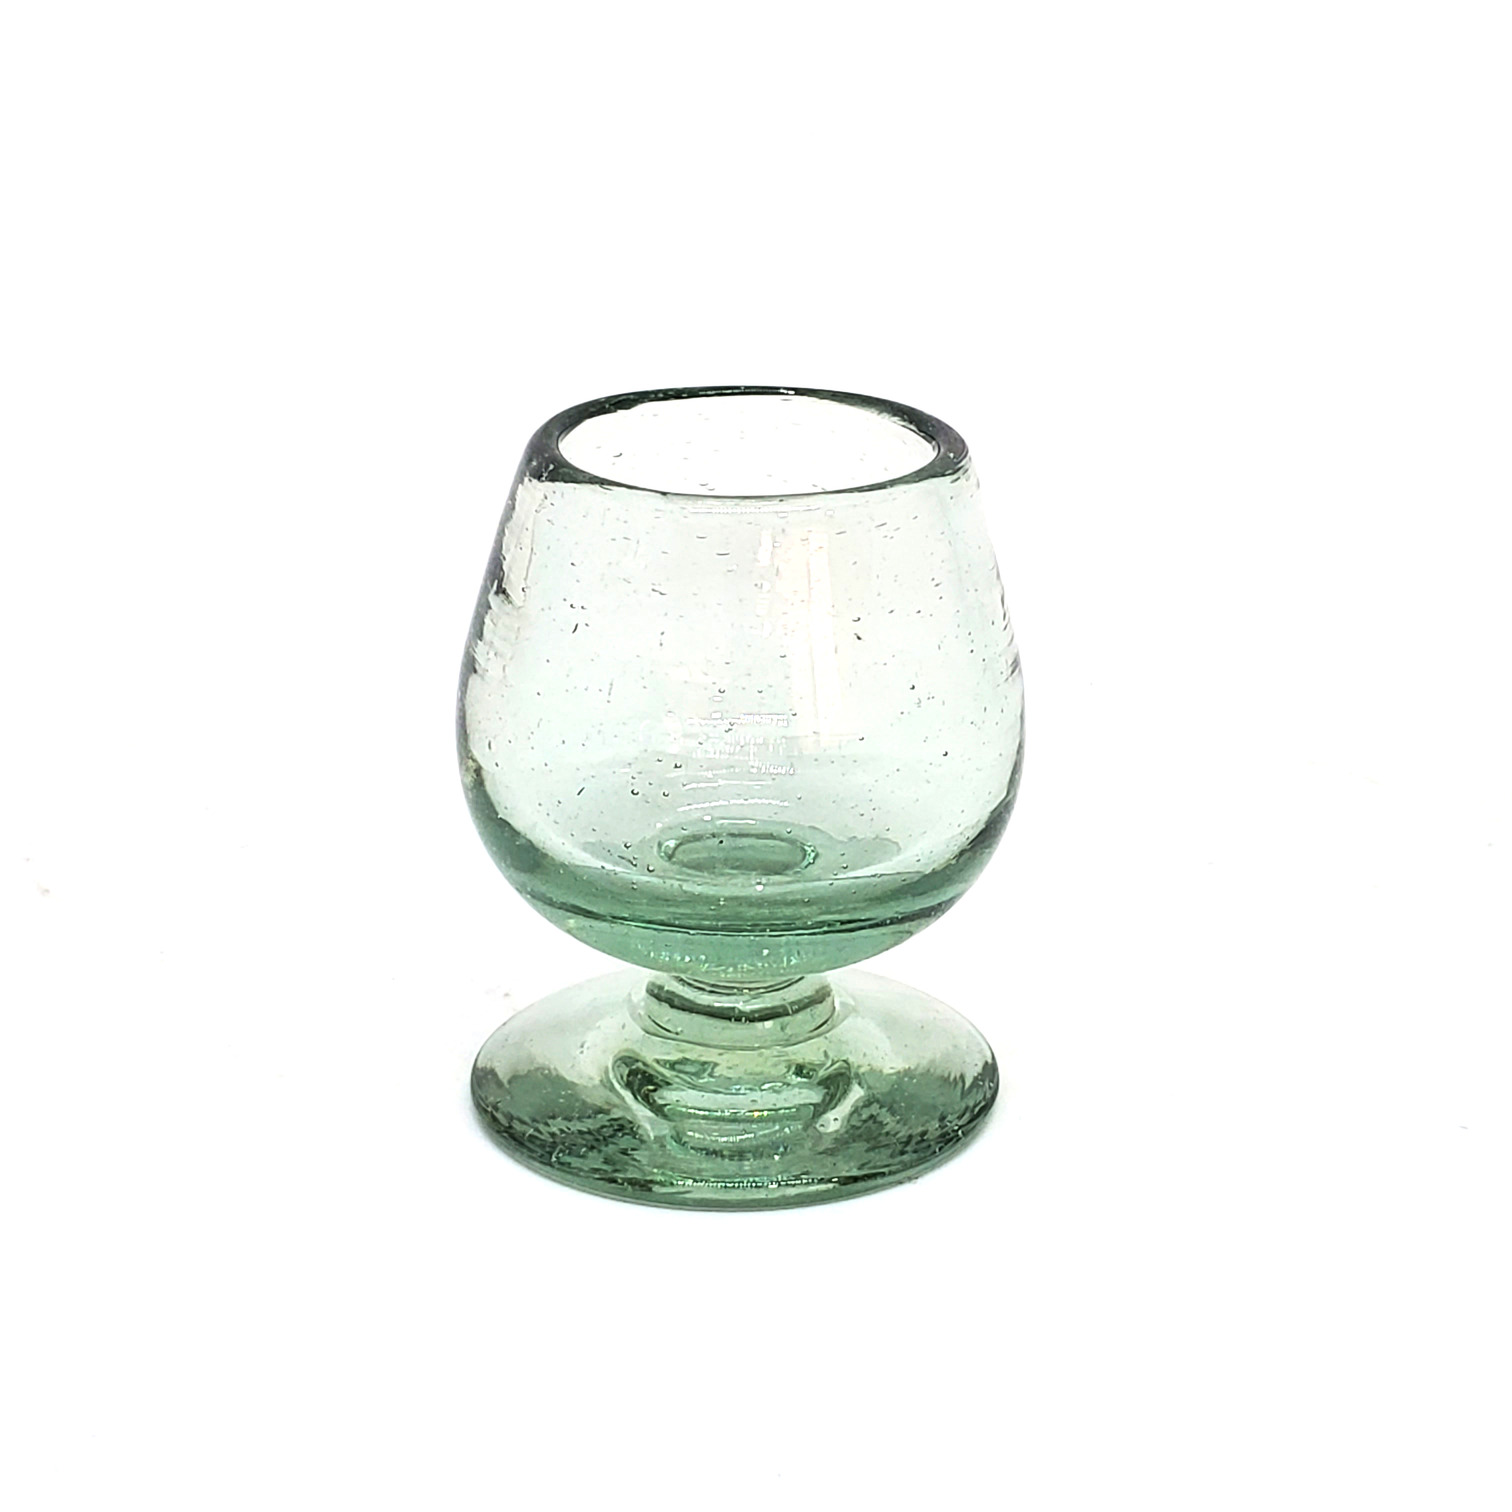 MEXICAN GLASSWARE / Clear 2.5 oz Tequila Sippers  (set of 6) / Sip your favourite tequila or mezcal with these iconic clear handcrafted sipping glasses. You may also serve lemon juice or other chasers.